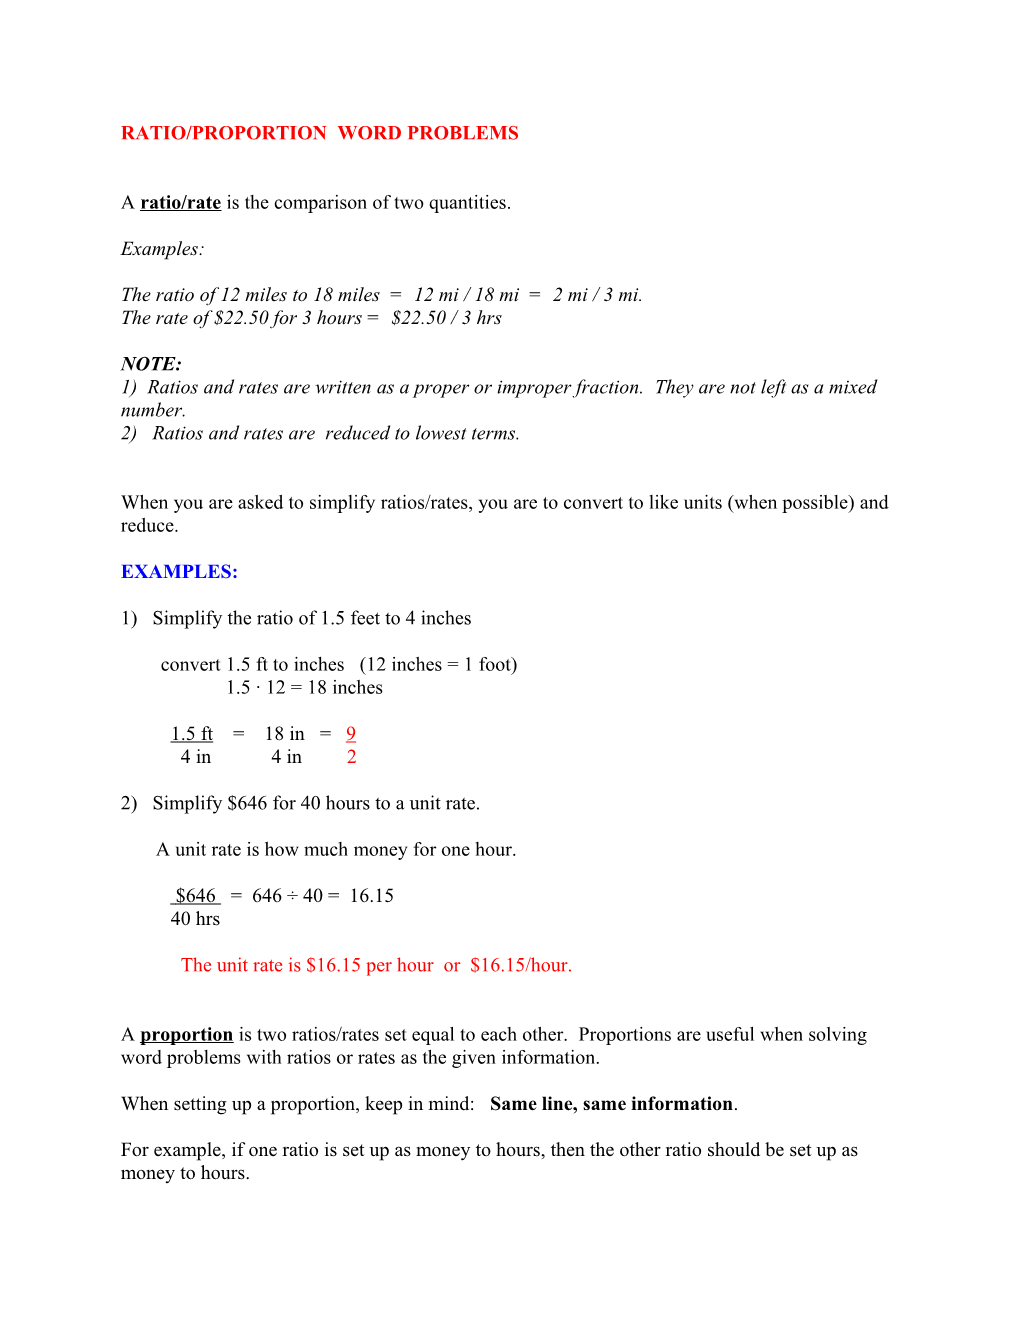 Ratio/Proportion Word Problems